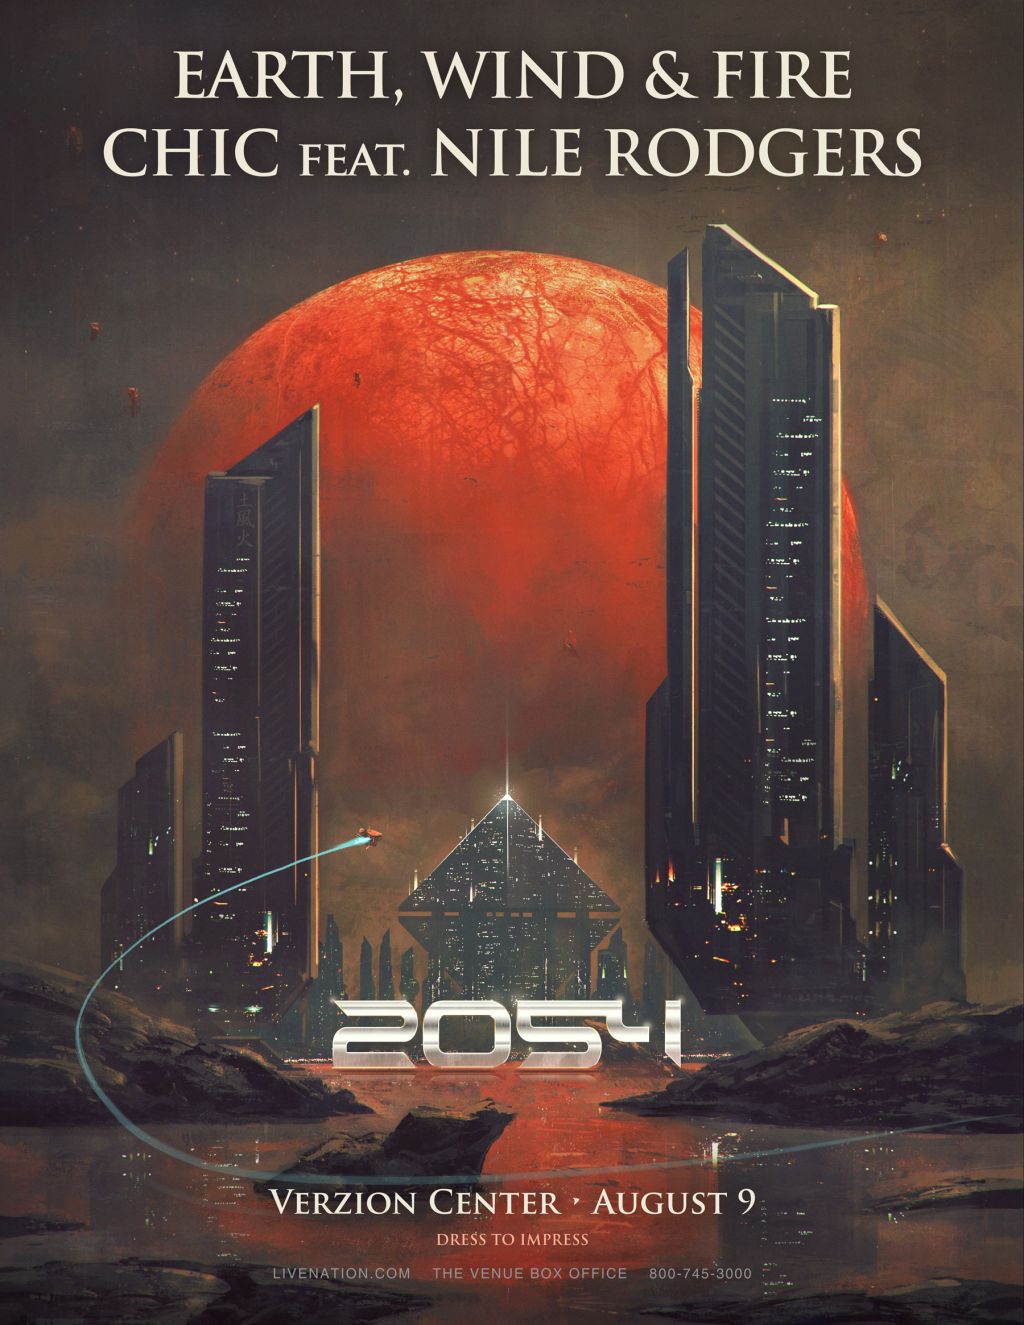 Earth, Wind & Fire and CHIC featuring Nile Rodgers